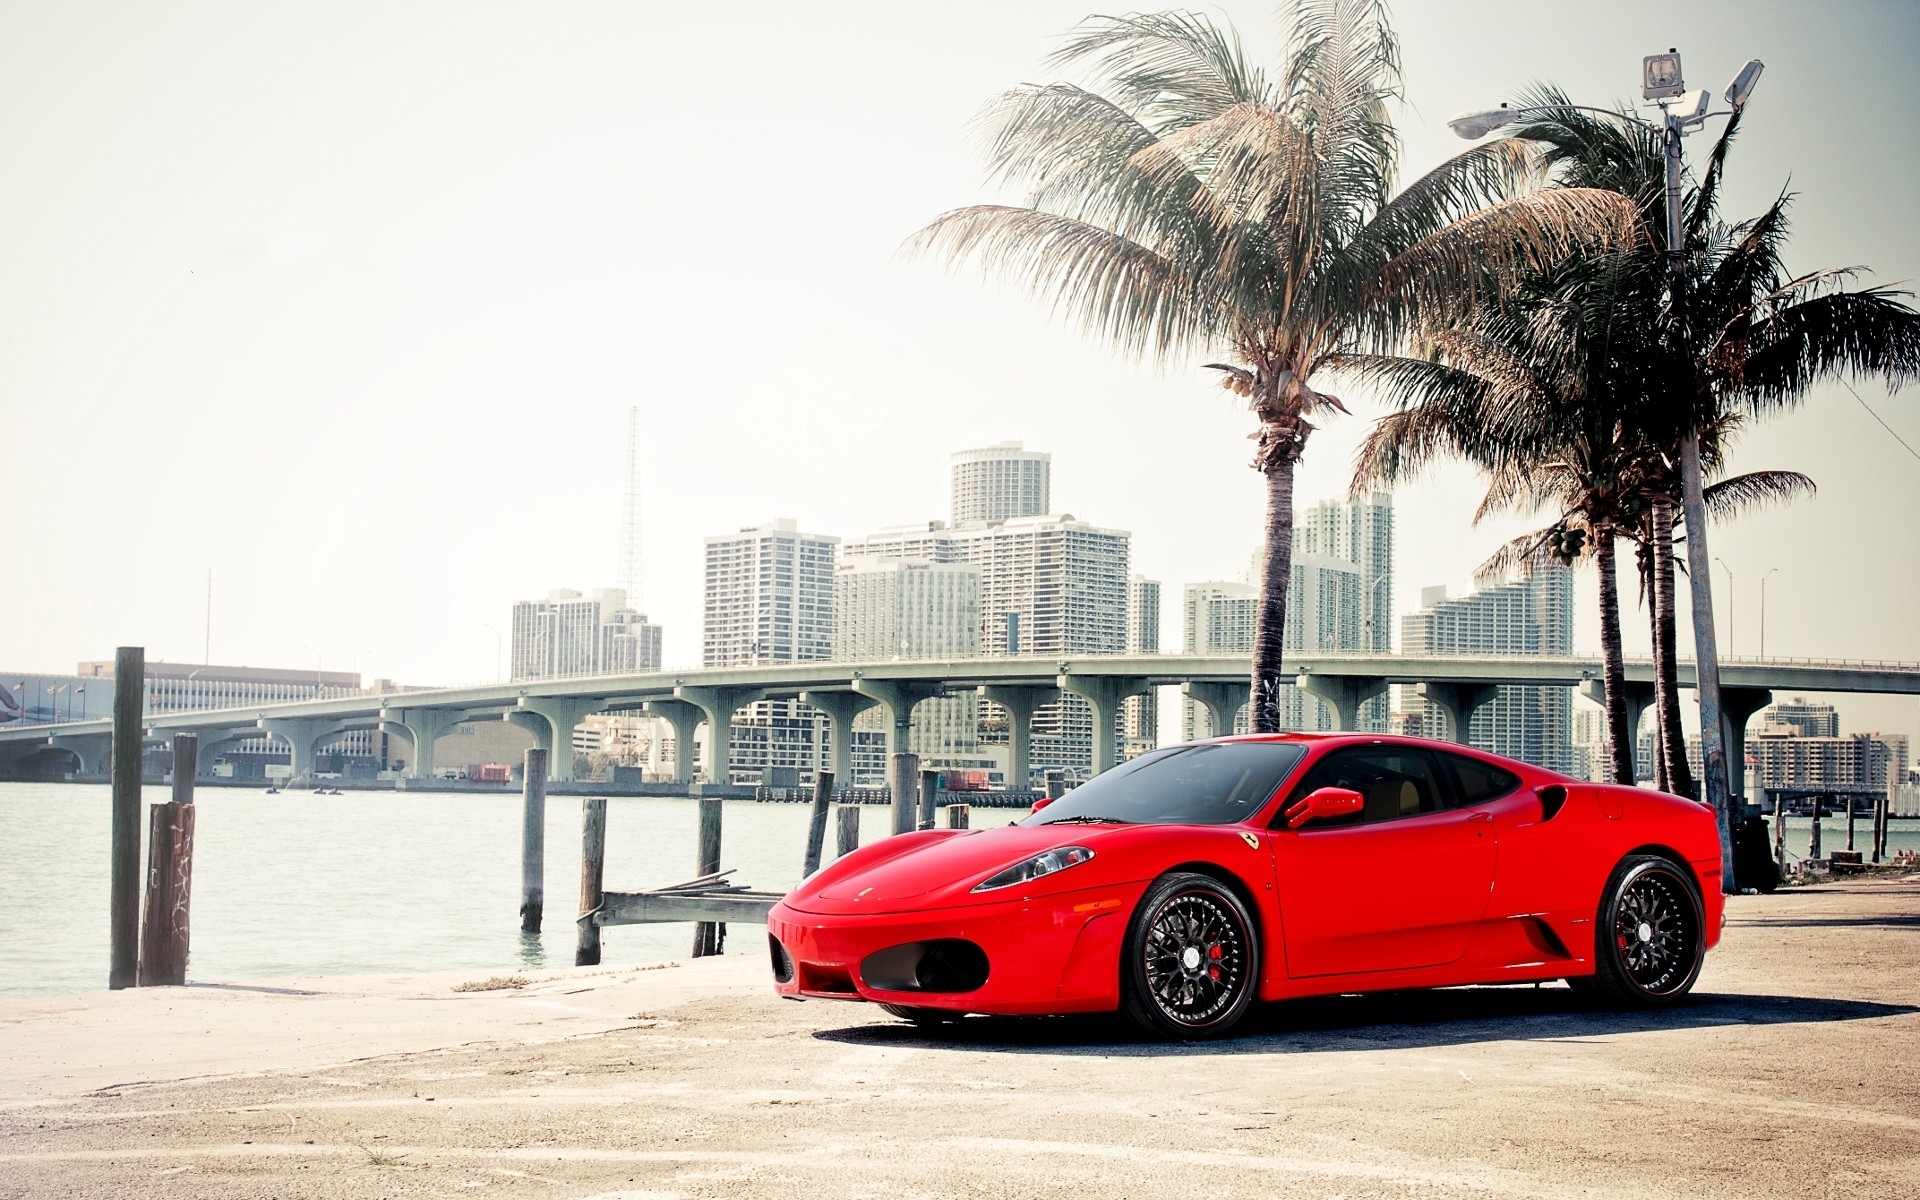 cityscapes, Cars, Ferrari, Vehicles, Palm, Trees, Red, Cars Wallpaper